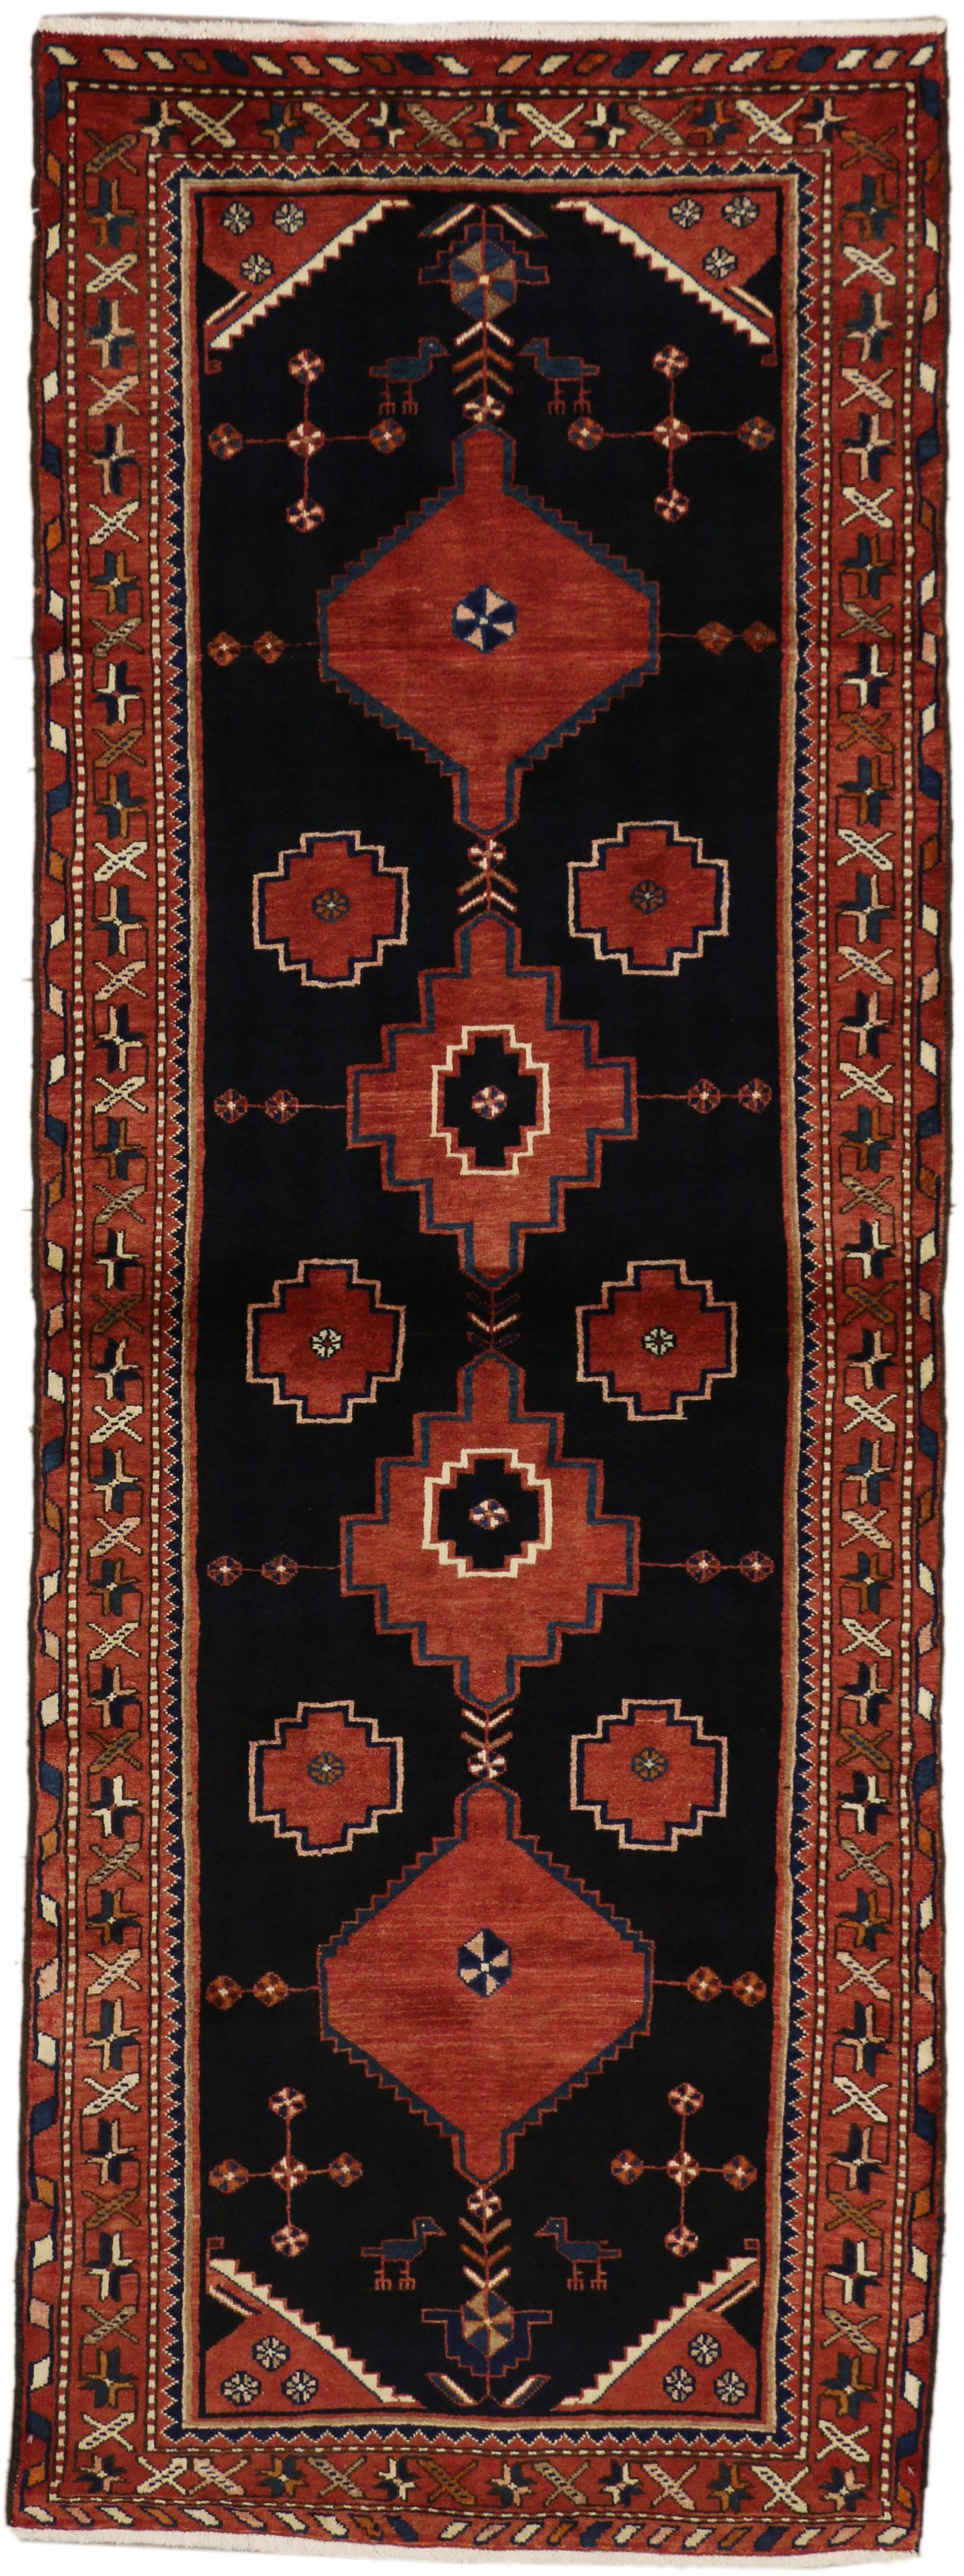 75359 Antique Persian Nahavand Hamadan Runner with Modern Tribal Style. Cleverly composed and well balanced, this antique Persian Nahavand Hamadan runner with modern tribal style showcases a charismatic tribal design rendered in saturated colors of